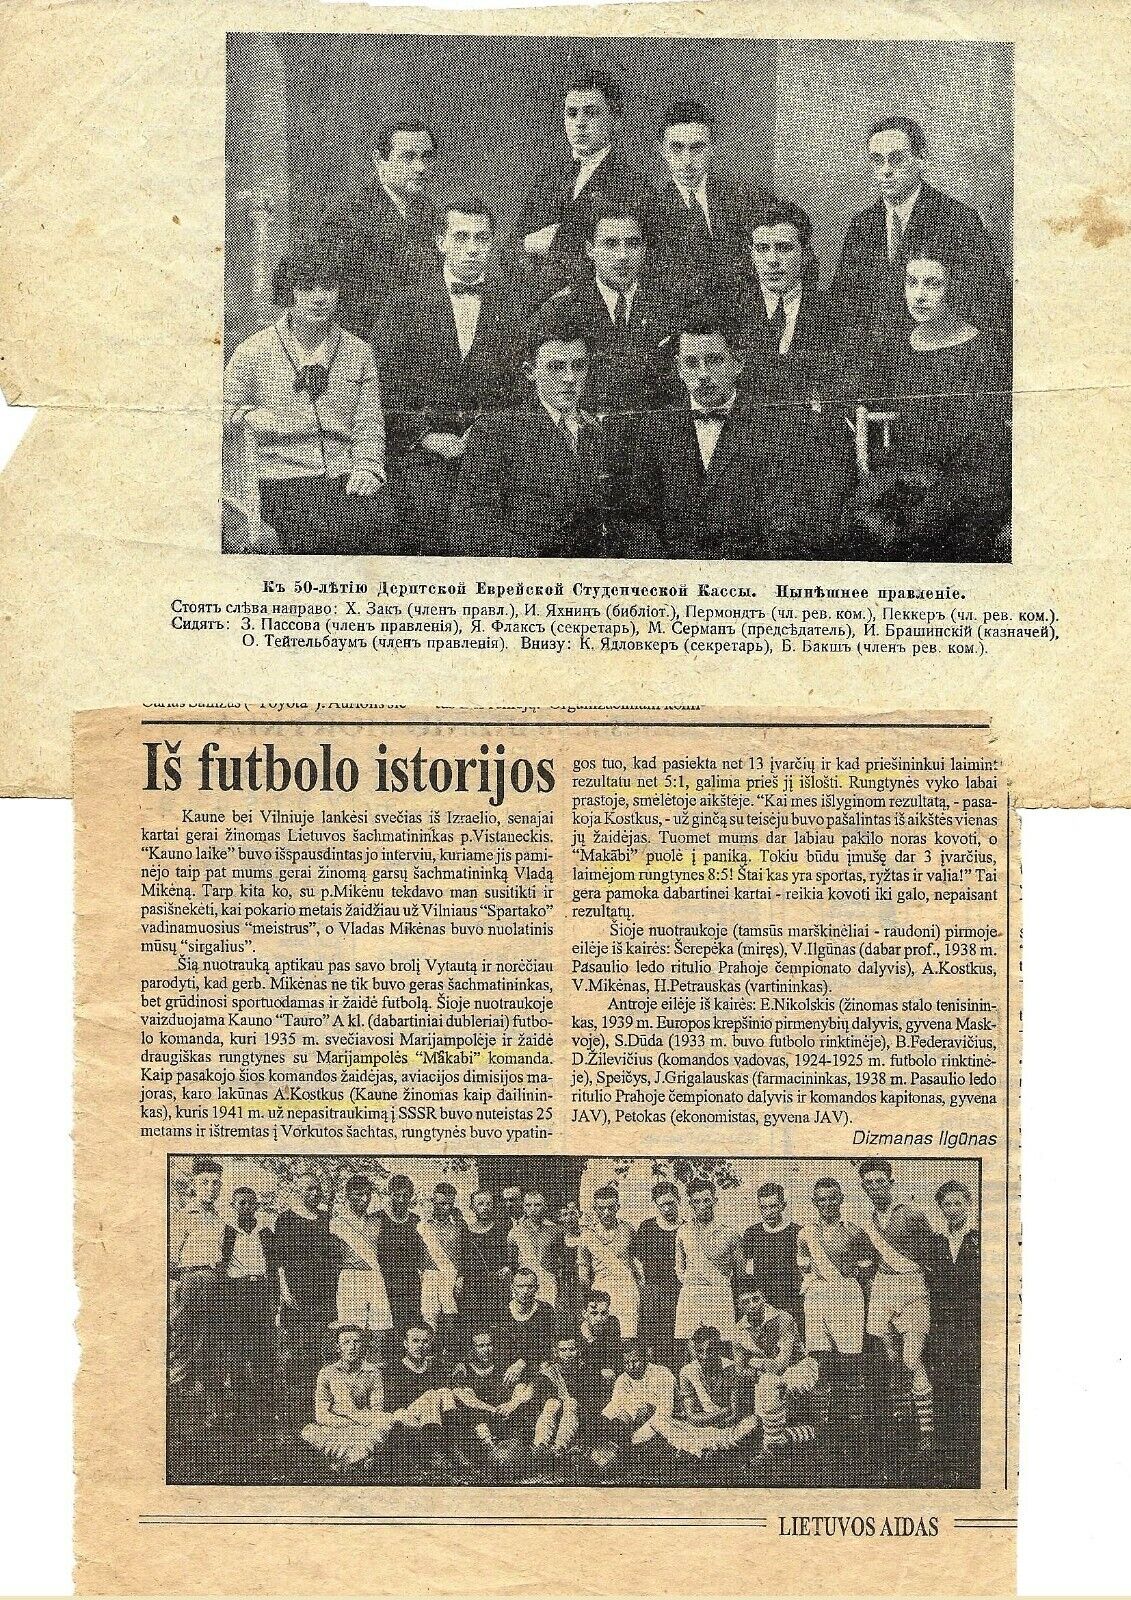 JUDAICA LITHUANIA AND RUSSIA 2 PICEES FROM NEWSPAPERS REGARDING JEWISH SPORTSMEN